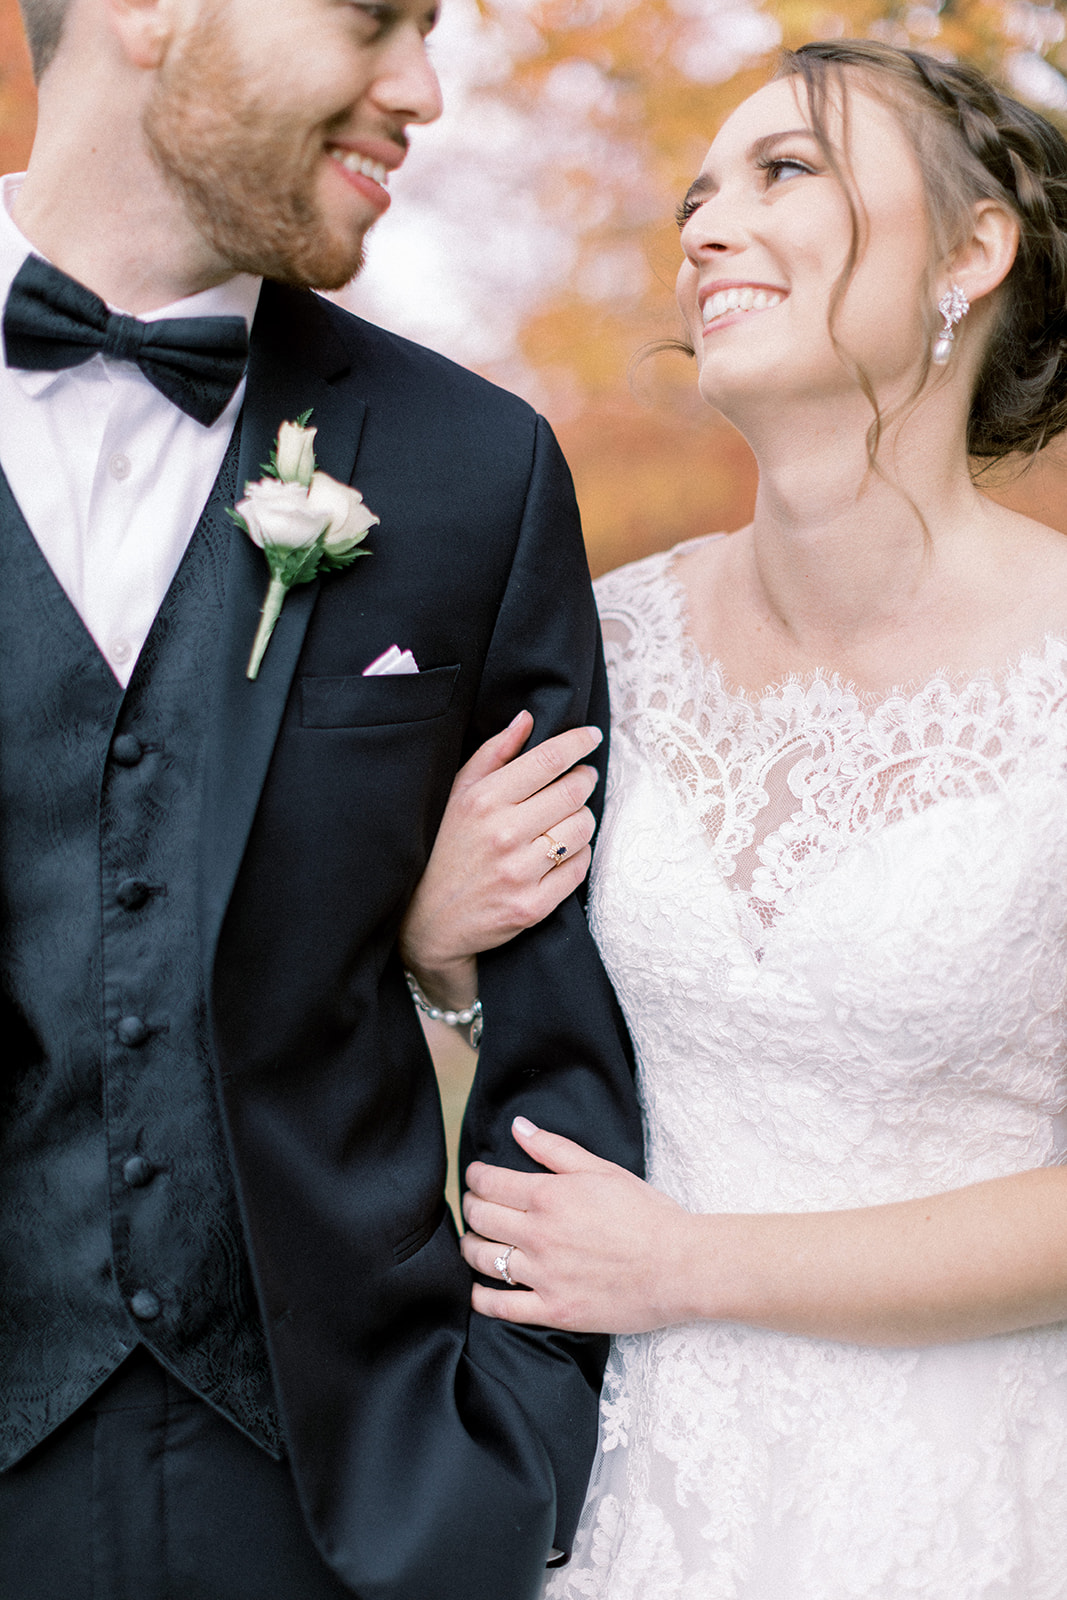 Pennsylvania wedding photographer captures bride looking up at groom smiling